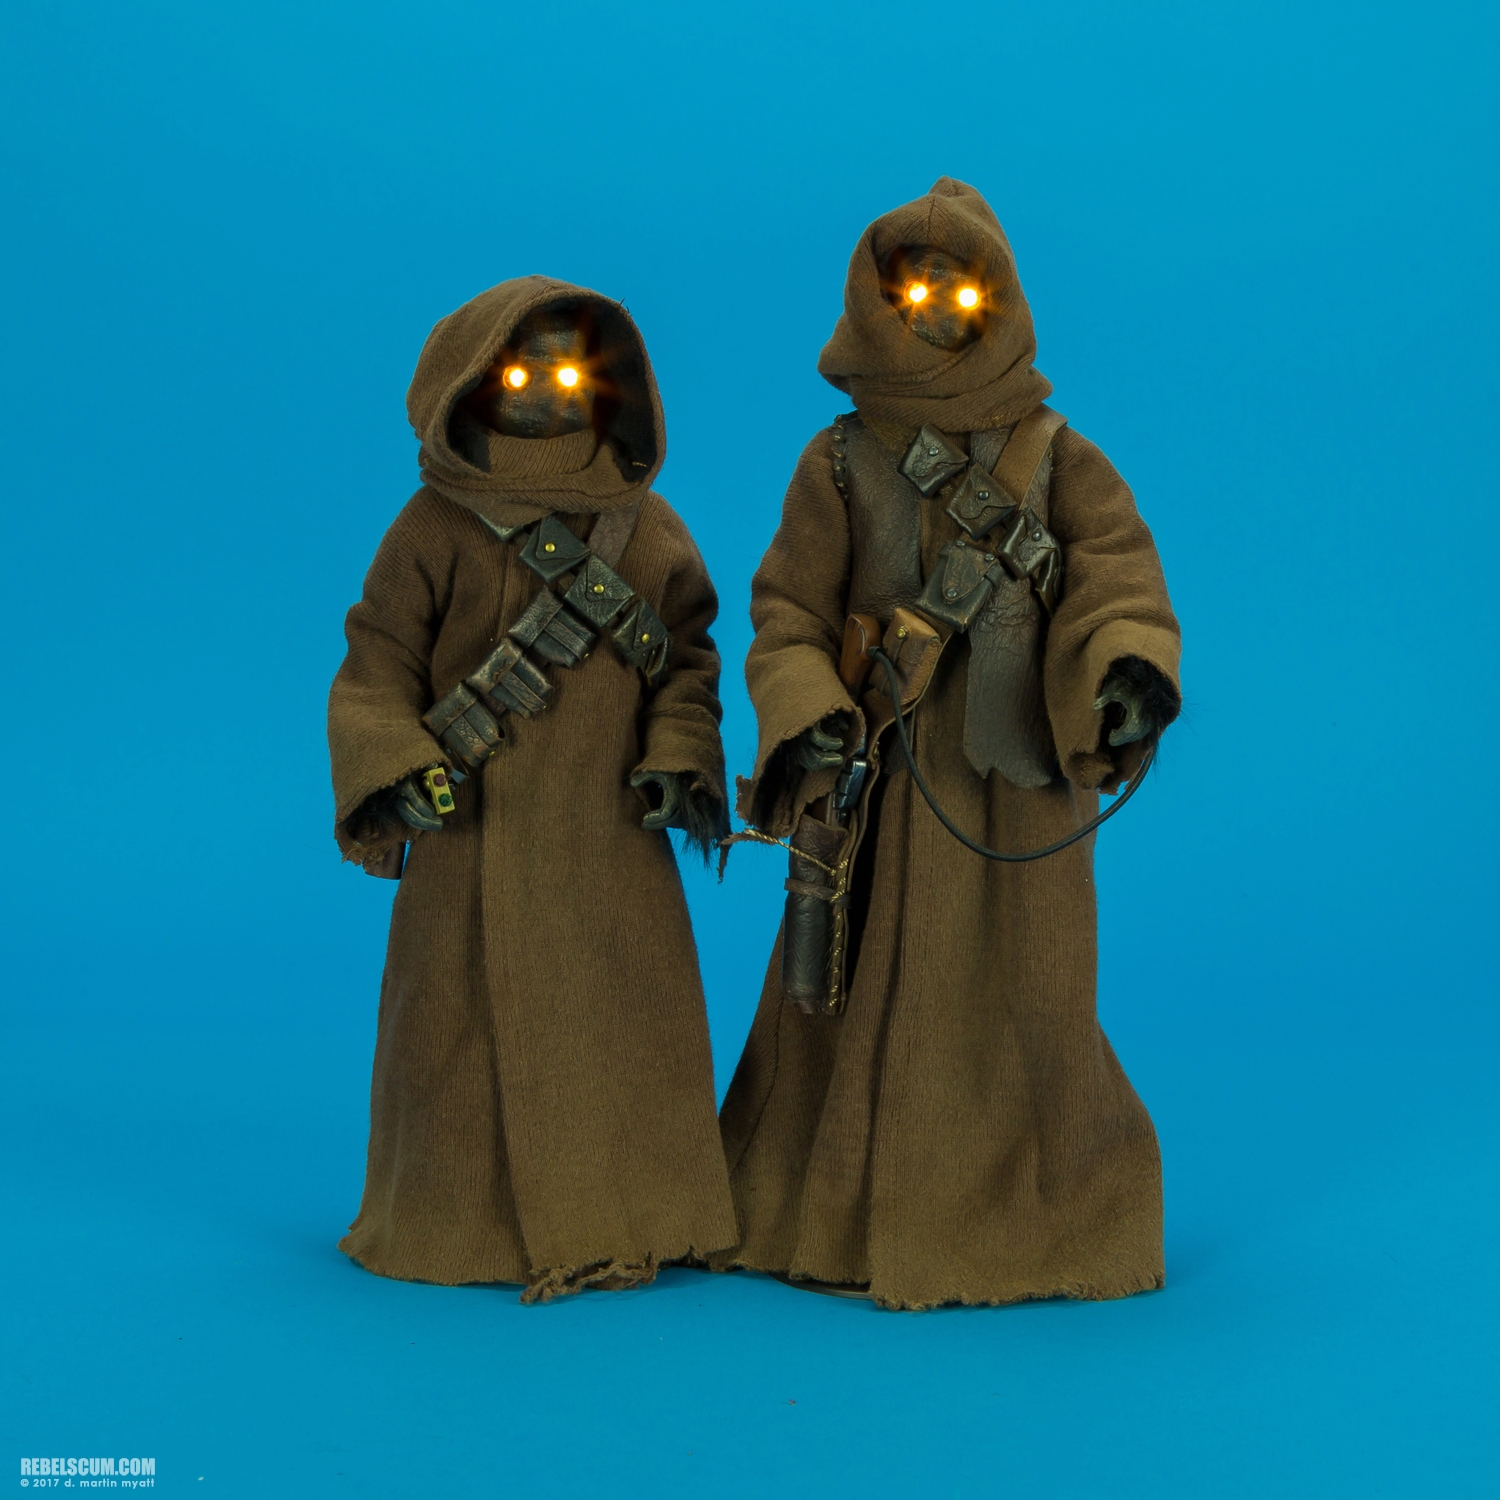 Jawa-Sixth-Scale-Figure-Two-Pack-Sideshow-Collectibles-021.jpg